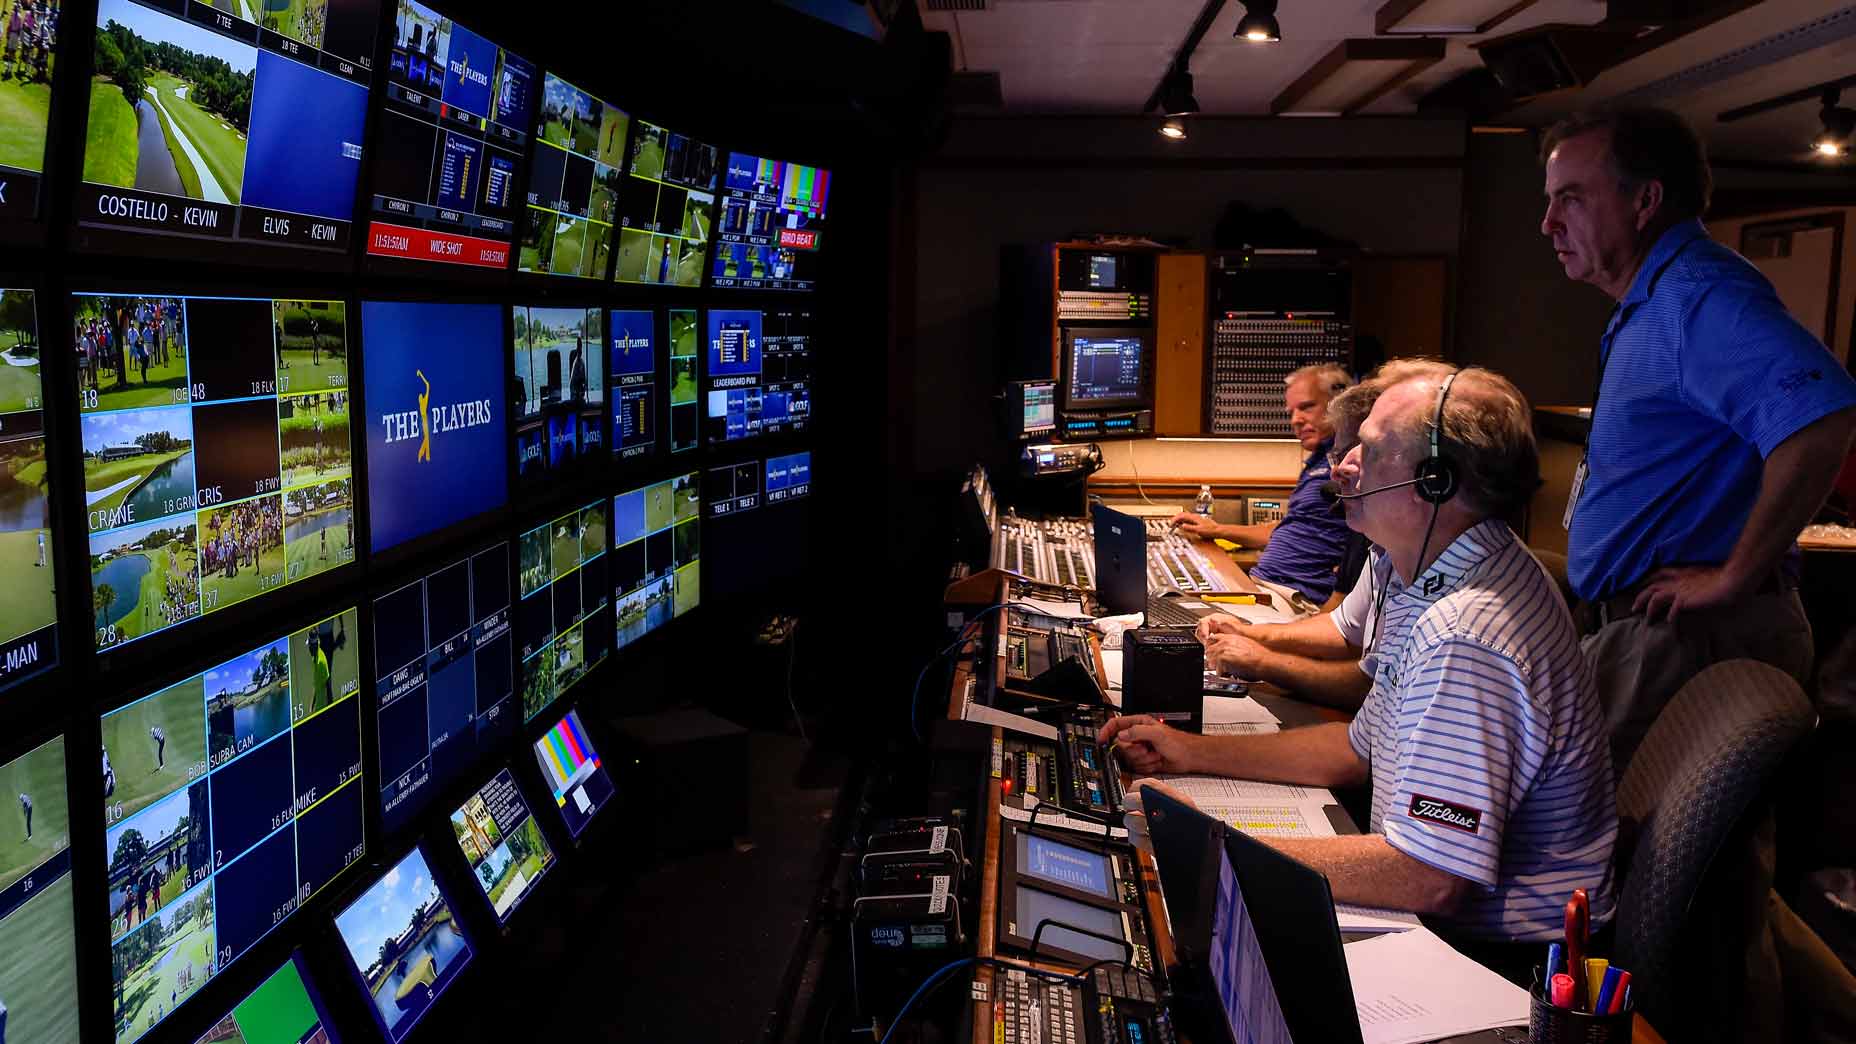 players championship tv coverage